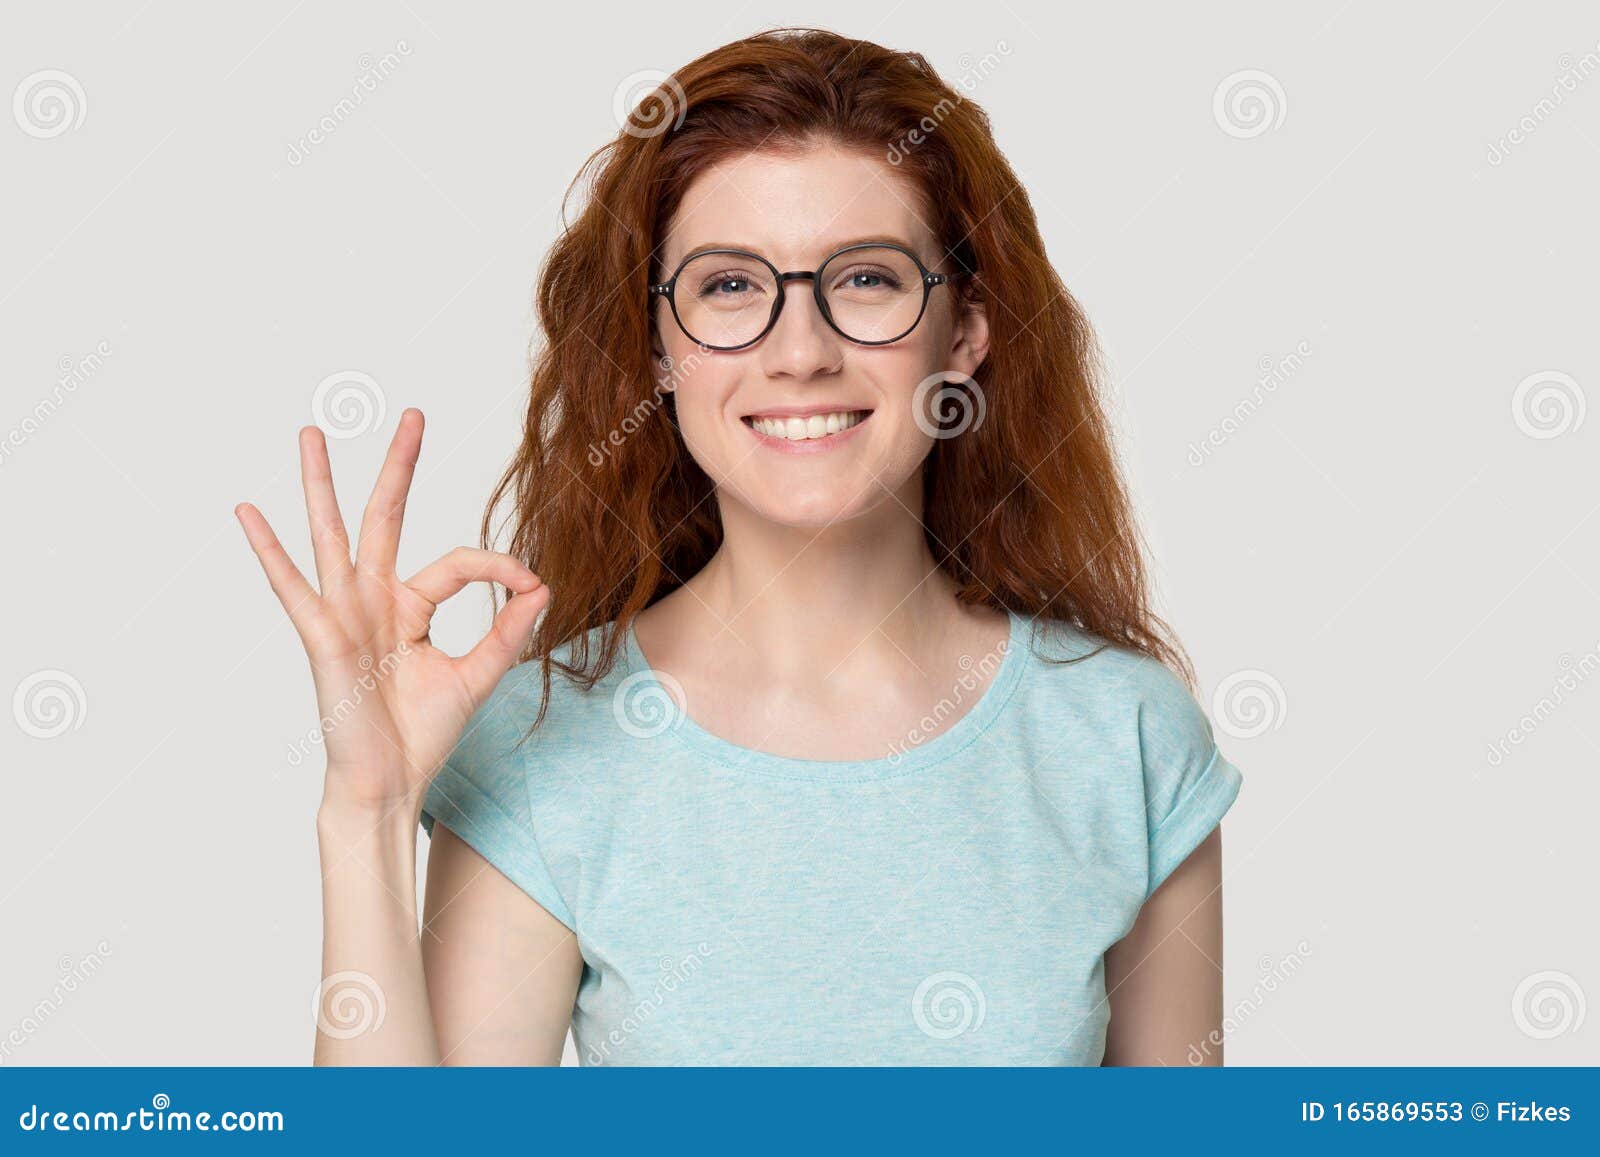 head shot portrait young smiling woman showing okey gesture.